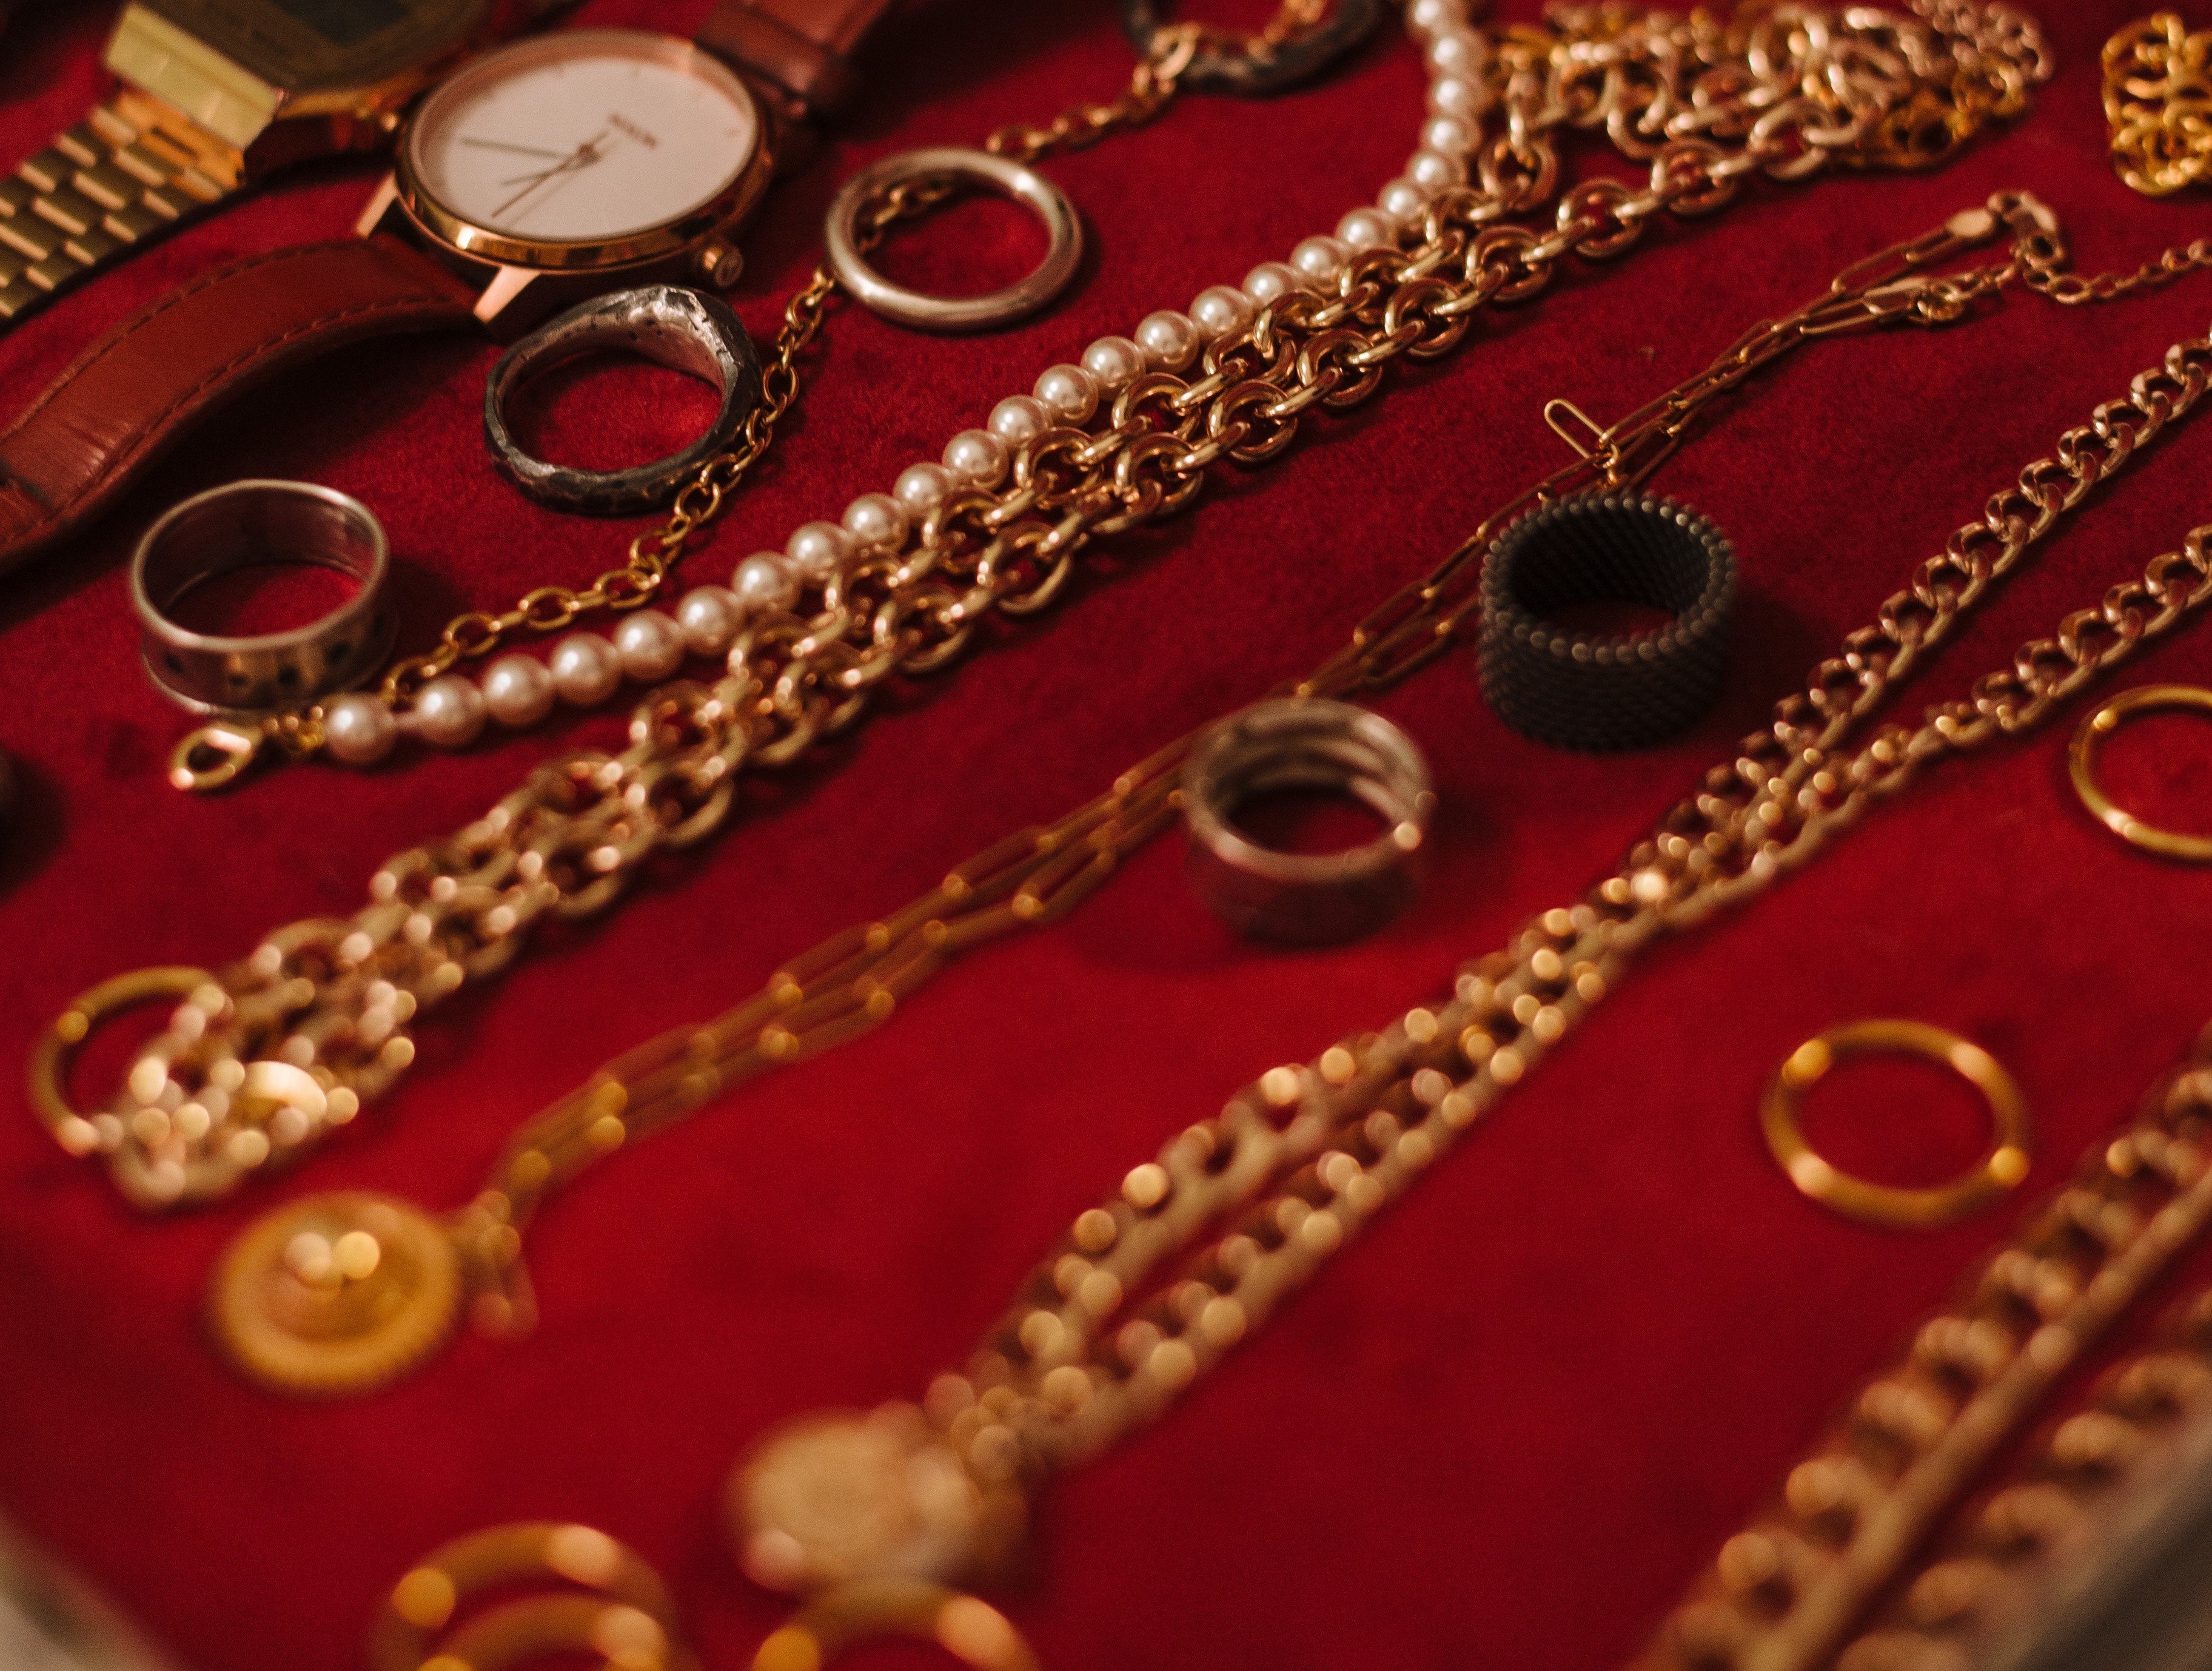 OP's cousin was hell-bent on possessing their late grandma's expensive jewelry. | Source: Pexels